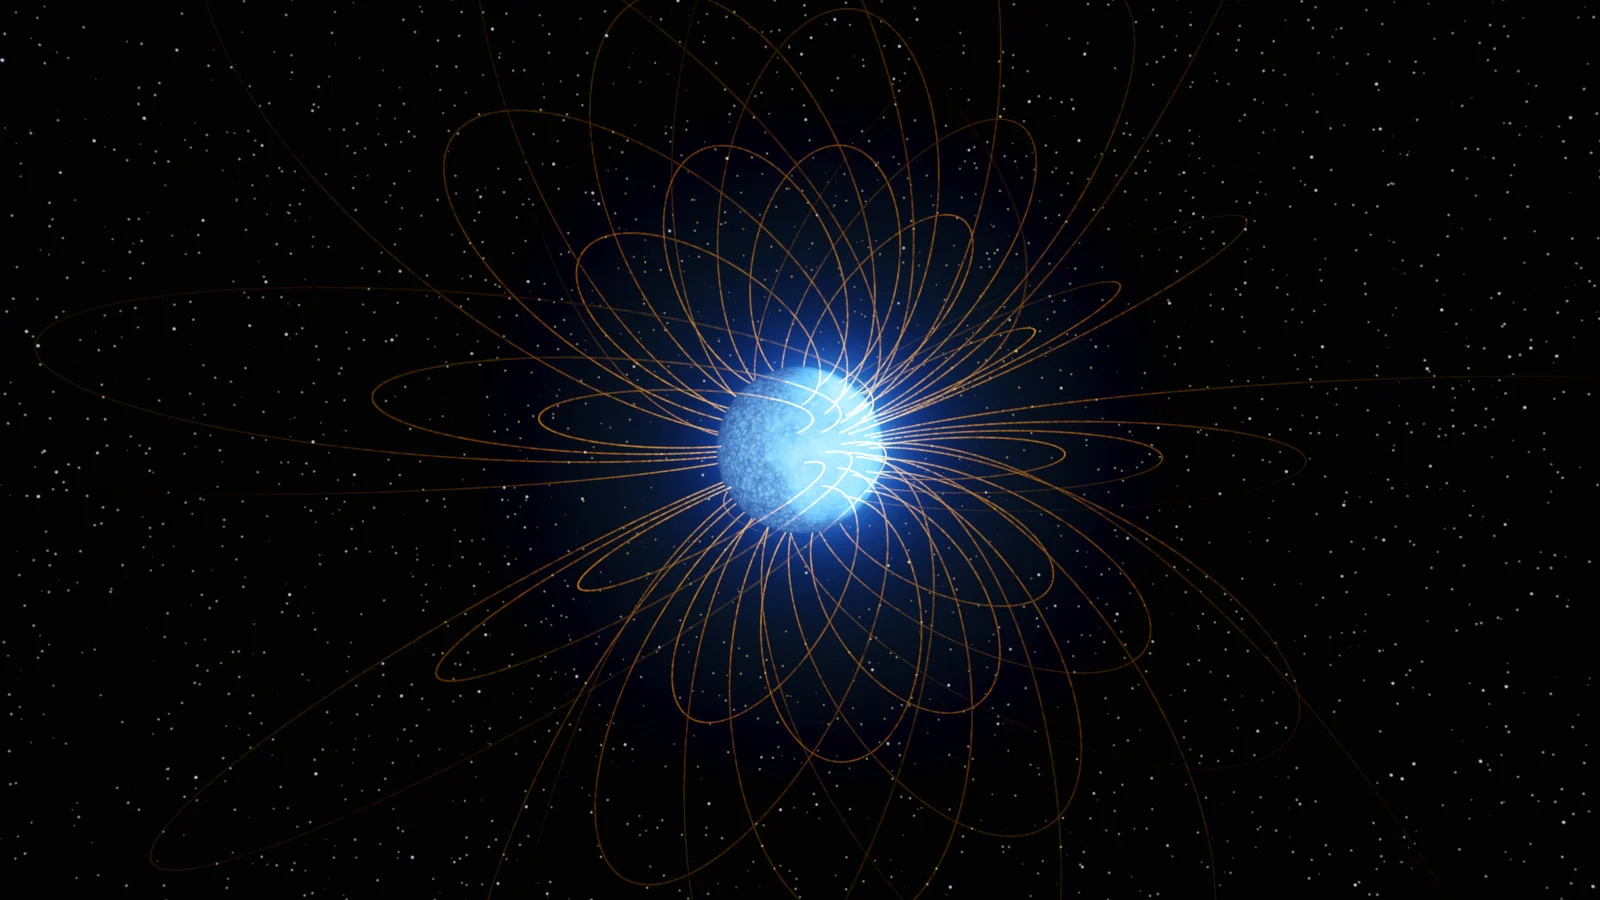 Two-Faced White Dwarf Star Magnetic Field Lines - K. Miller Caltech IPAC